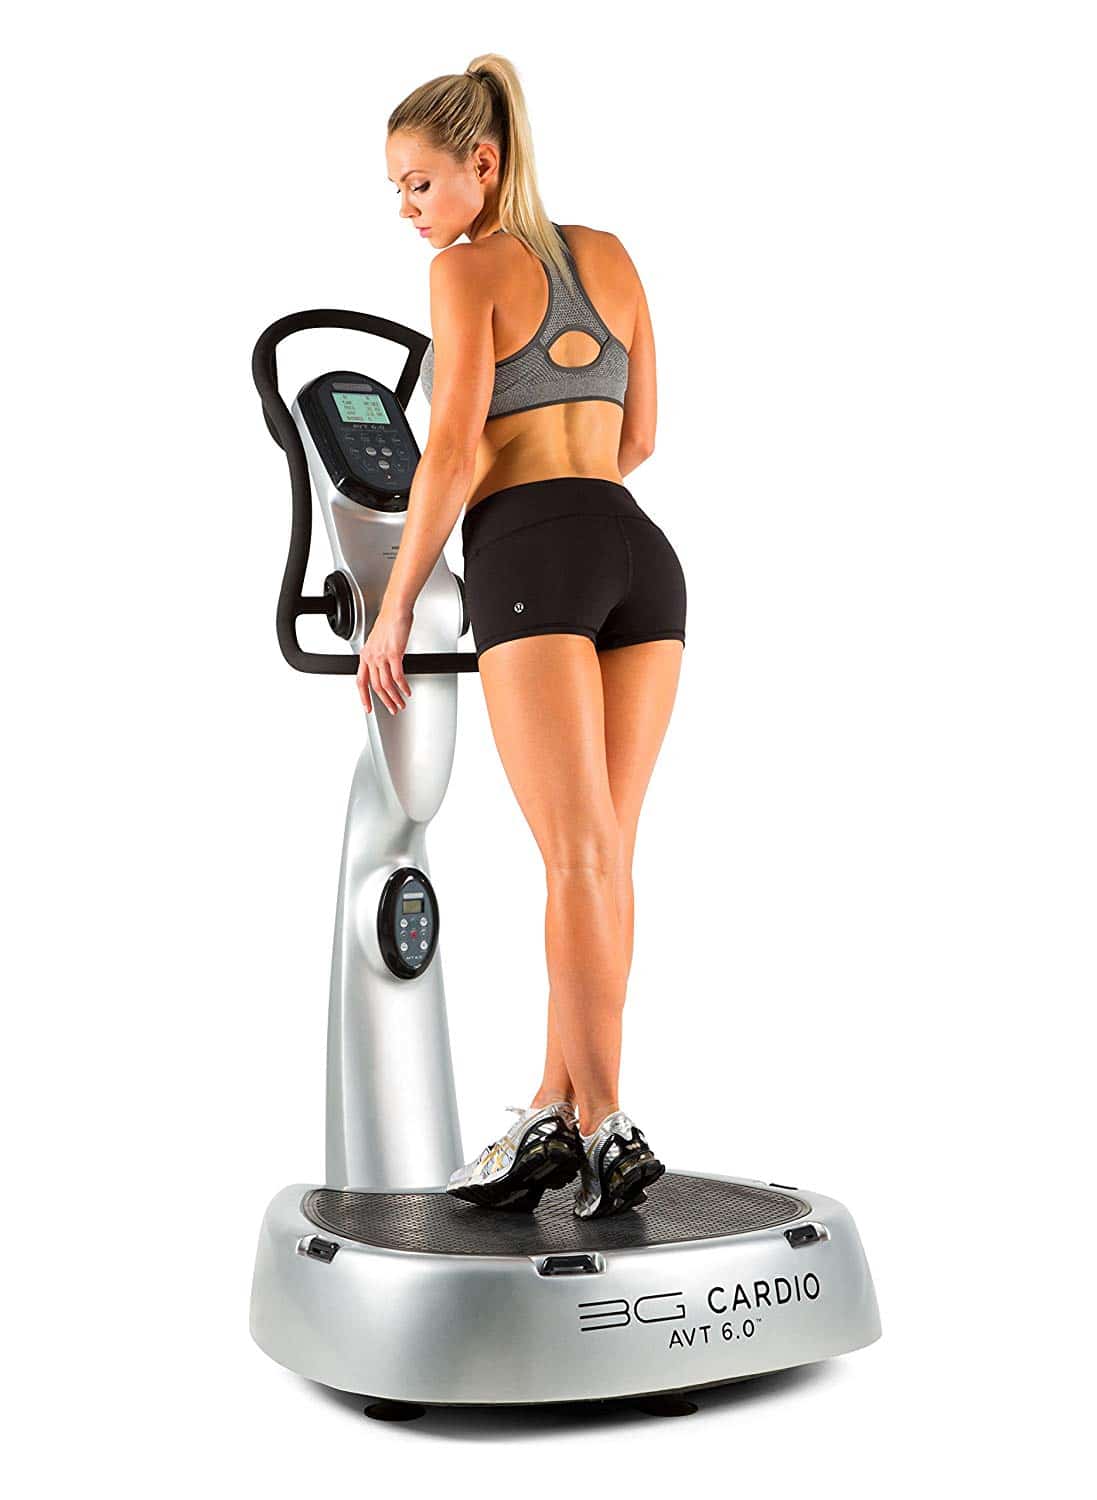 Best Vibration Machine For Home Use